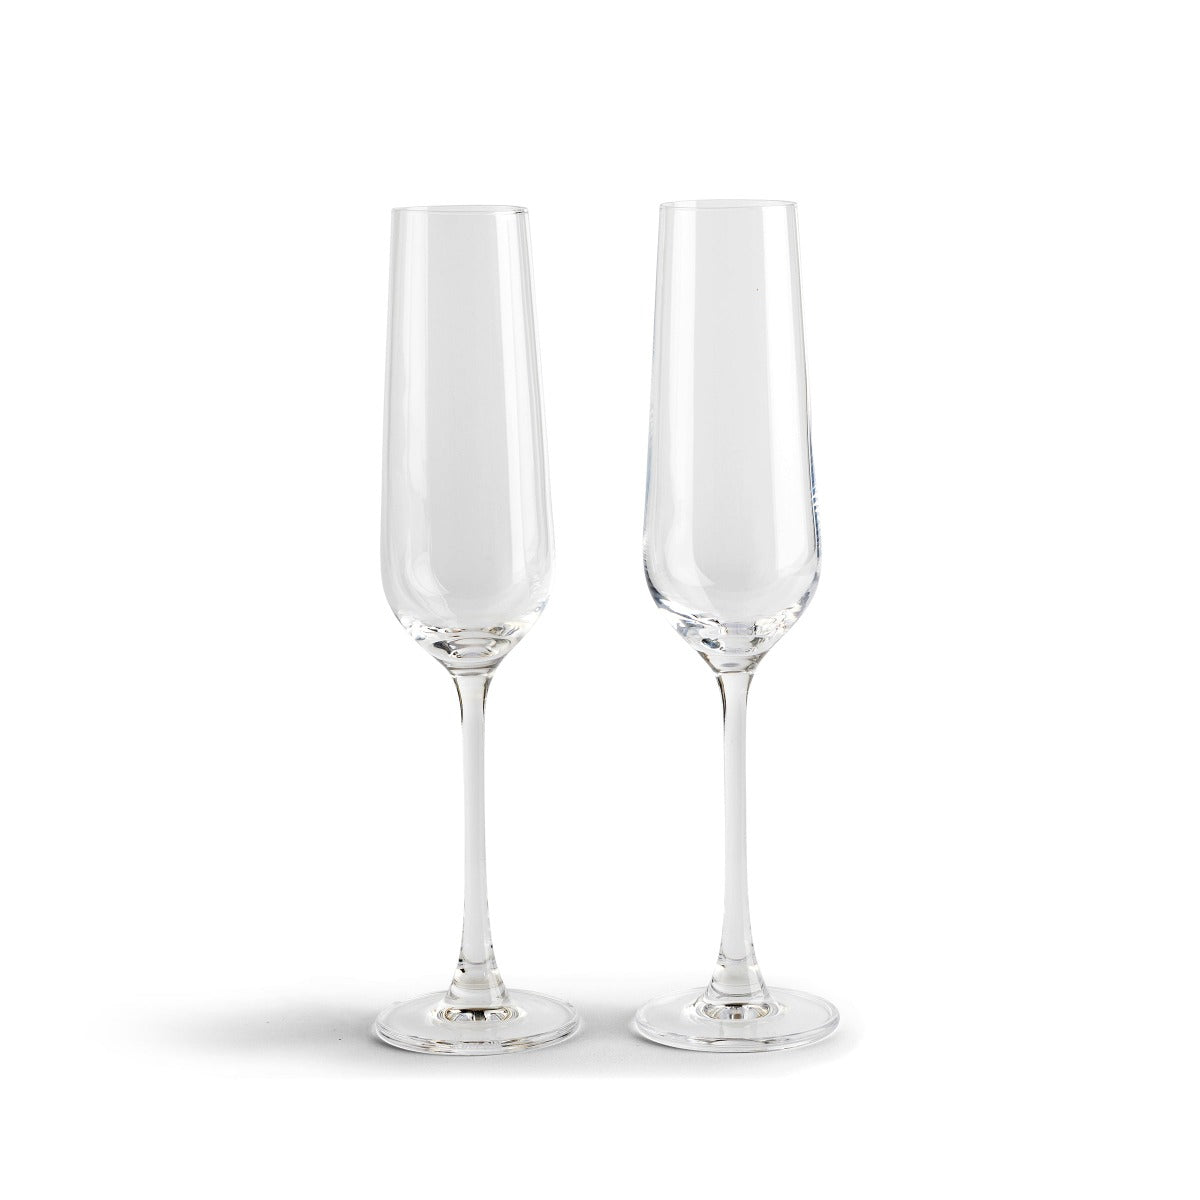 Keltum Lead-Free Crystal Champagne GreenPan of 2 Official Flutes, | Set Store ©